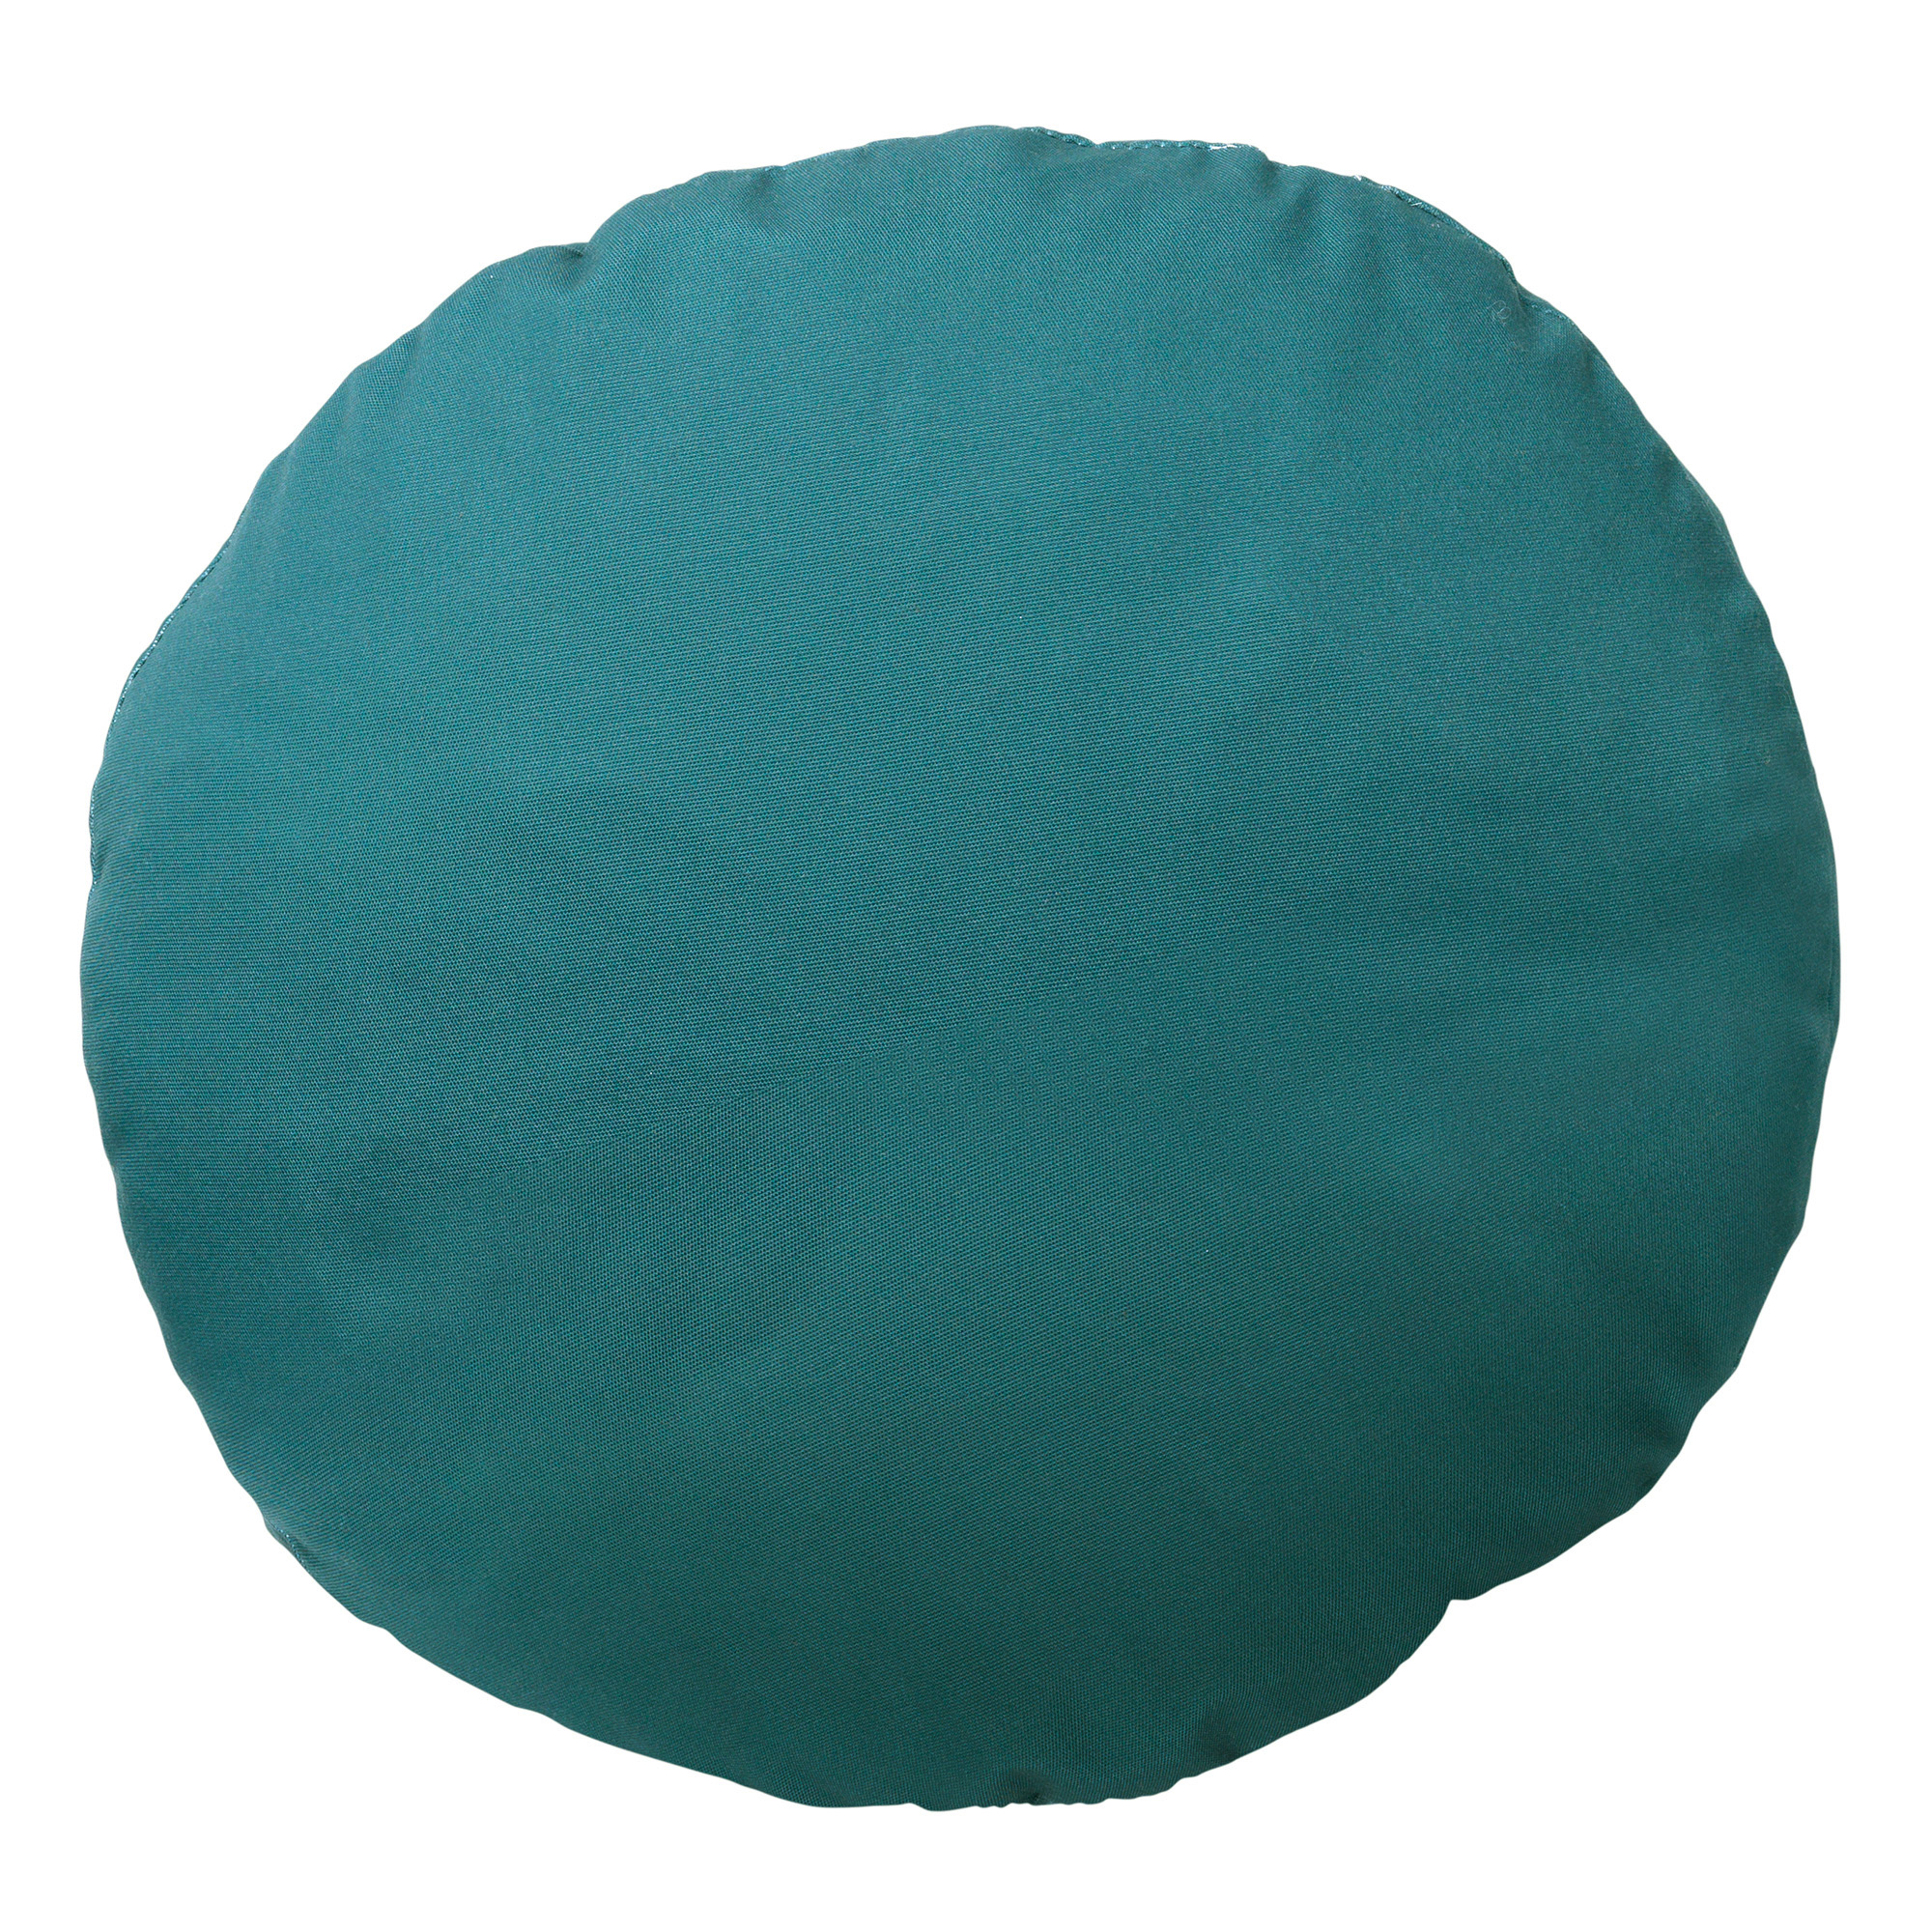 SOL - Cushion round outdoor 40 cm Sagebrush Green - water-repellent and uv-resistant - green